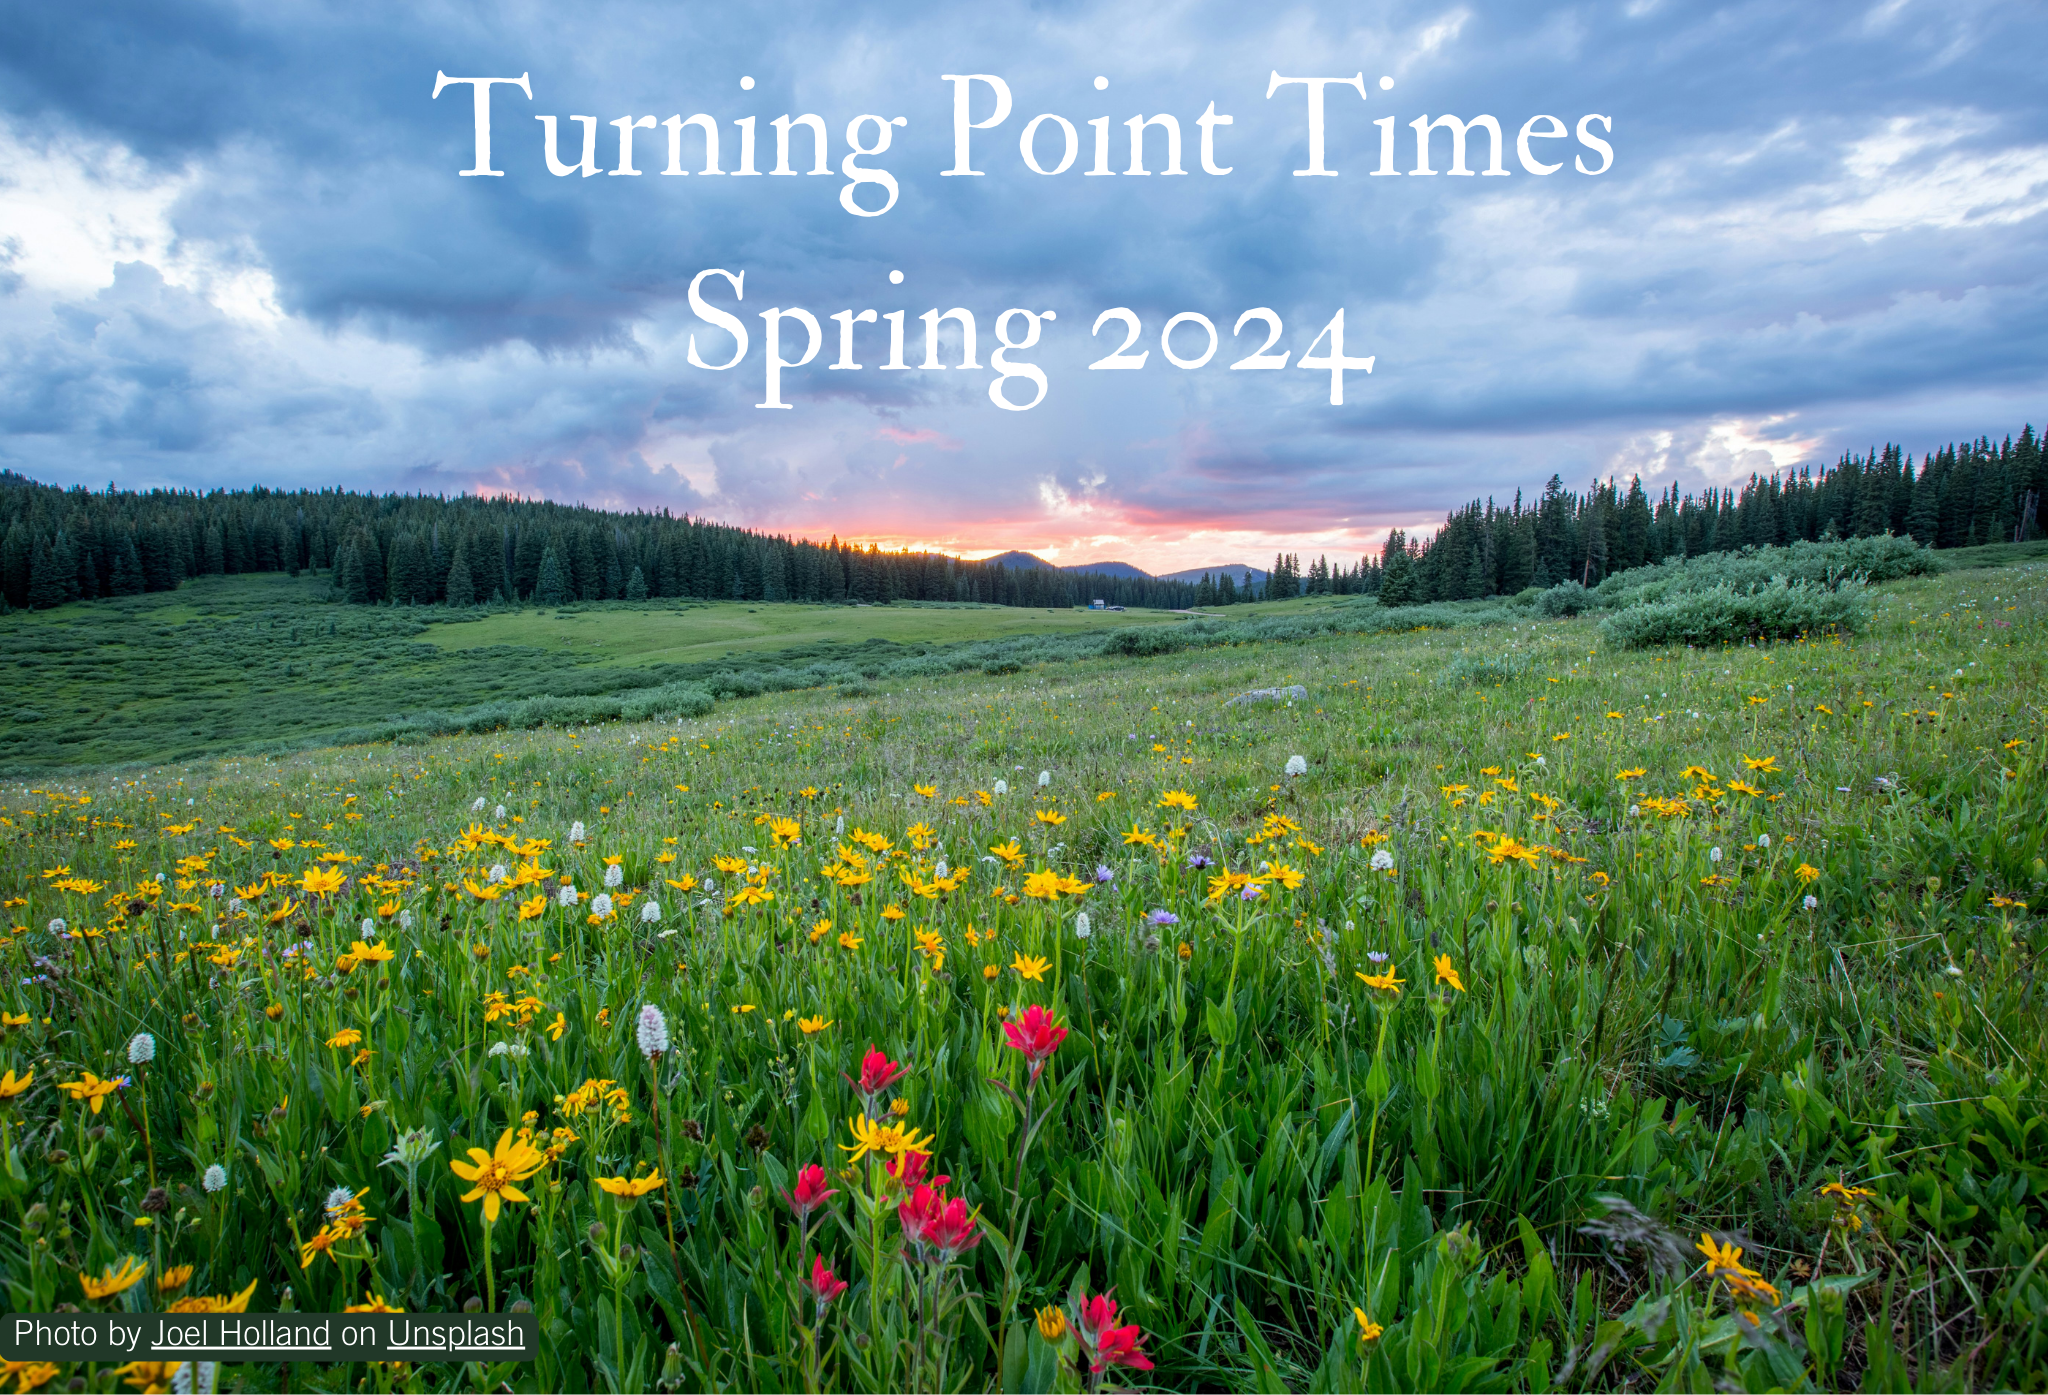 Turning Point Times Spring 2024 Cover Photo